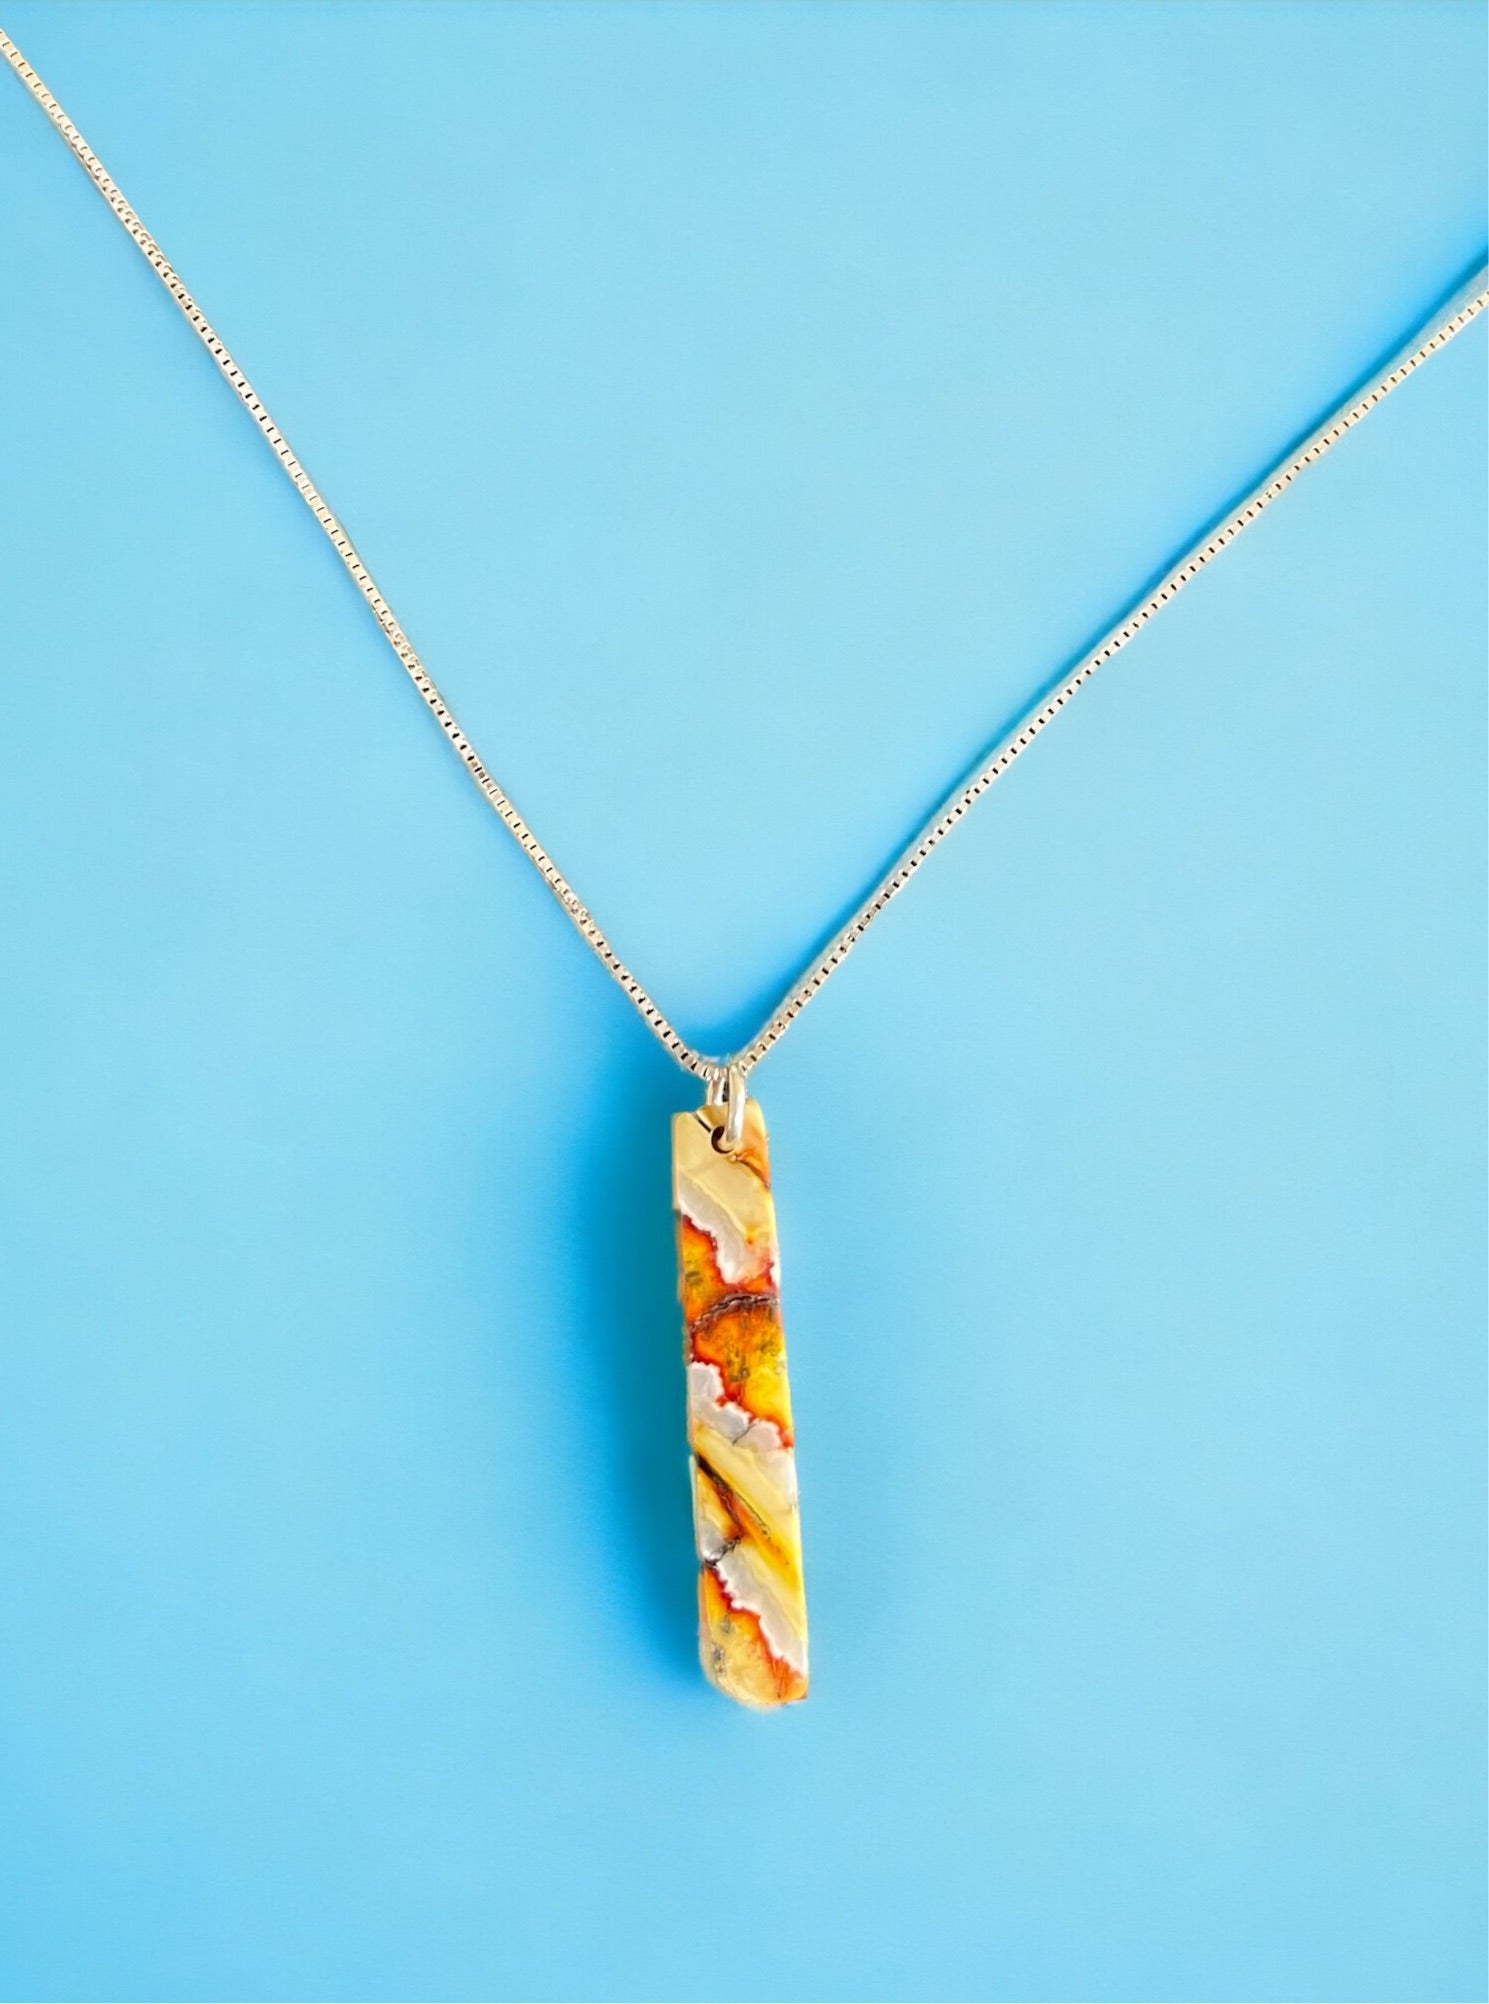 Dyed mammoth tooth necklace